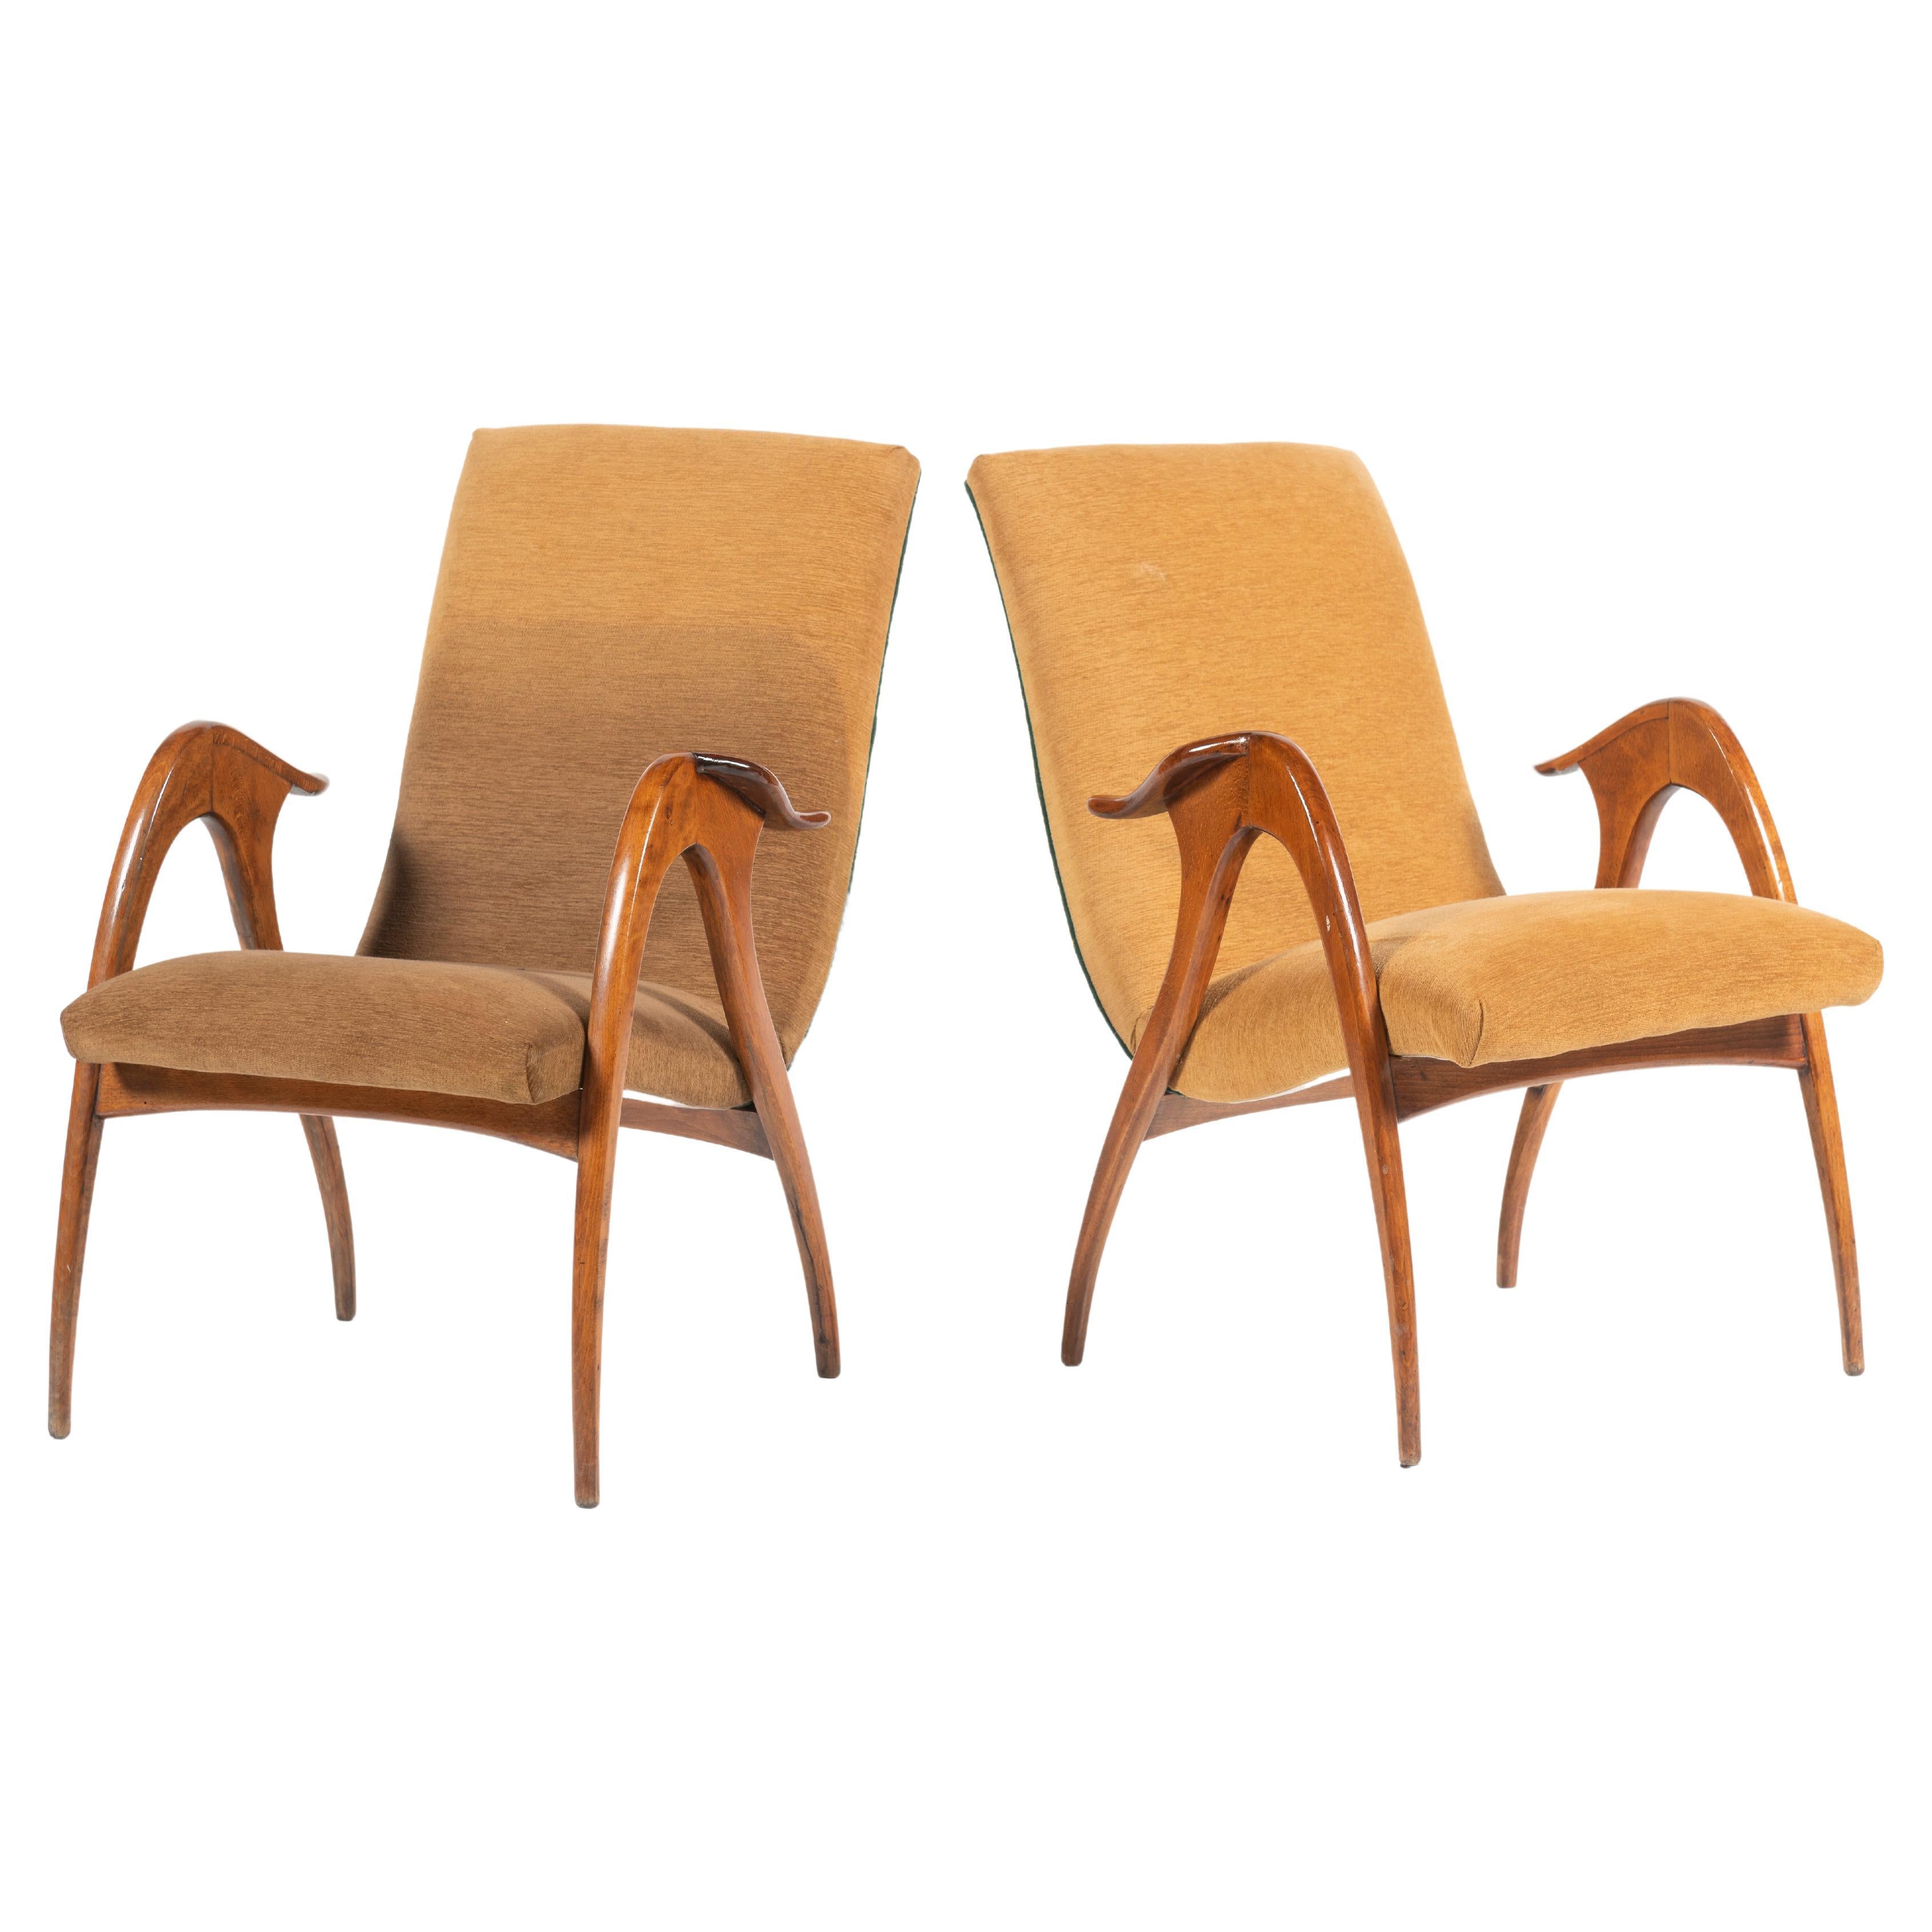 Pair of Vintage Malatesta & Mason Walnut and Upholstery Armchairs, Italy, 1950s For Sale